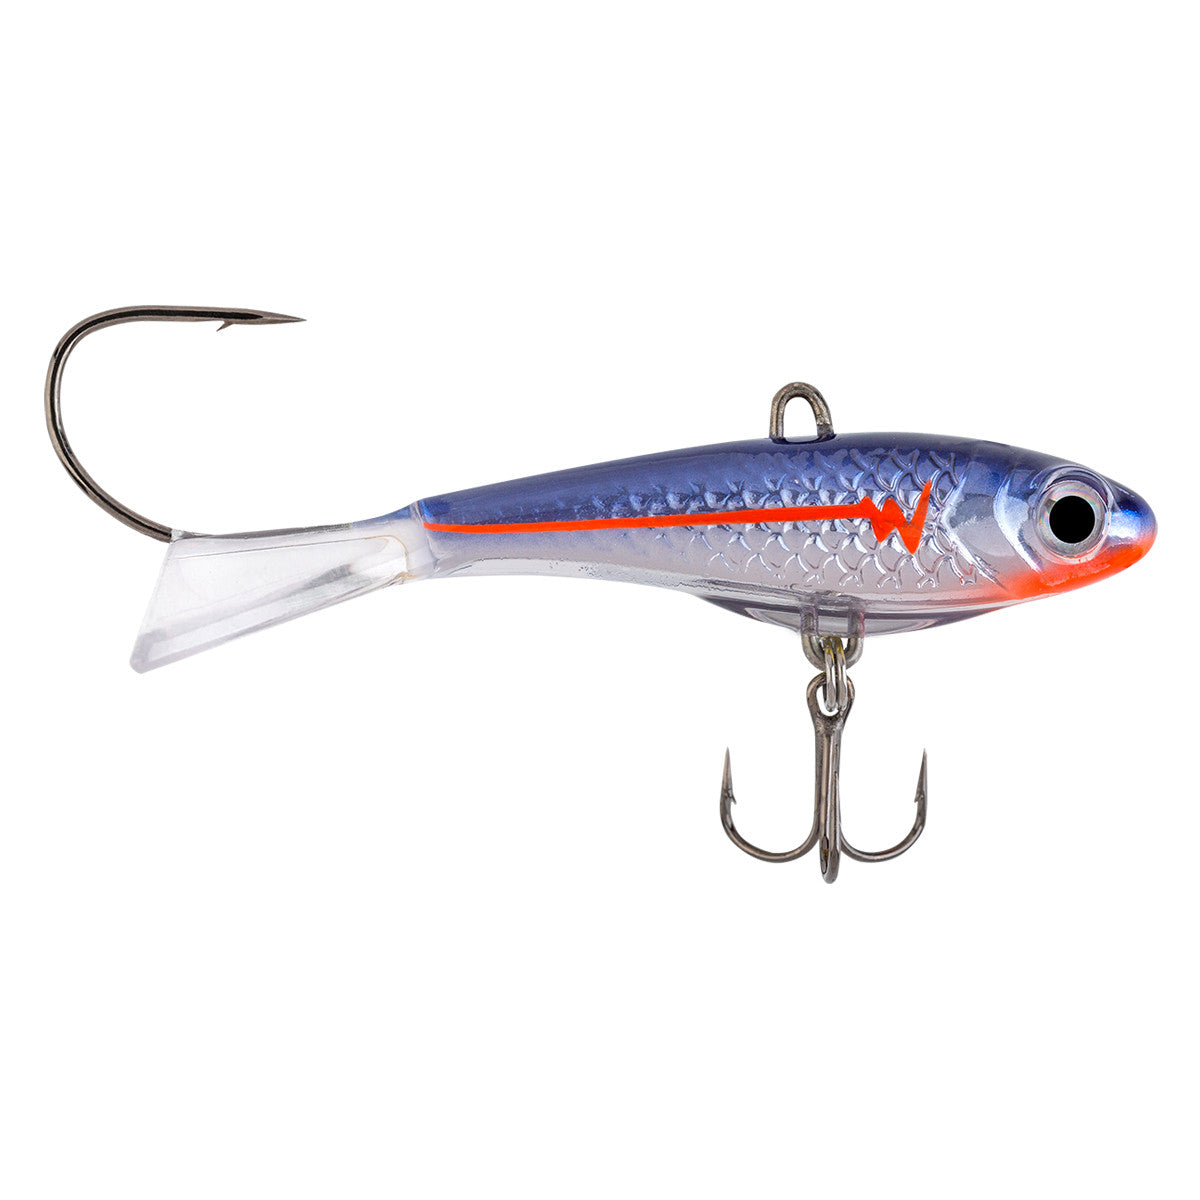 Northland Fishing Tackle: 1/8oz Puppet Minnow glo perch